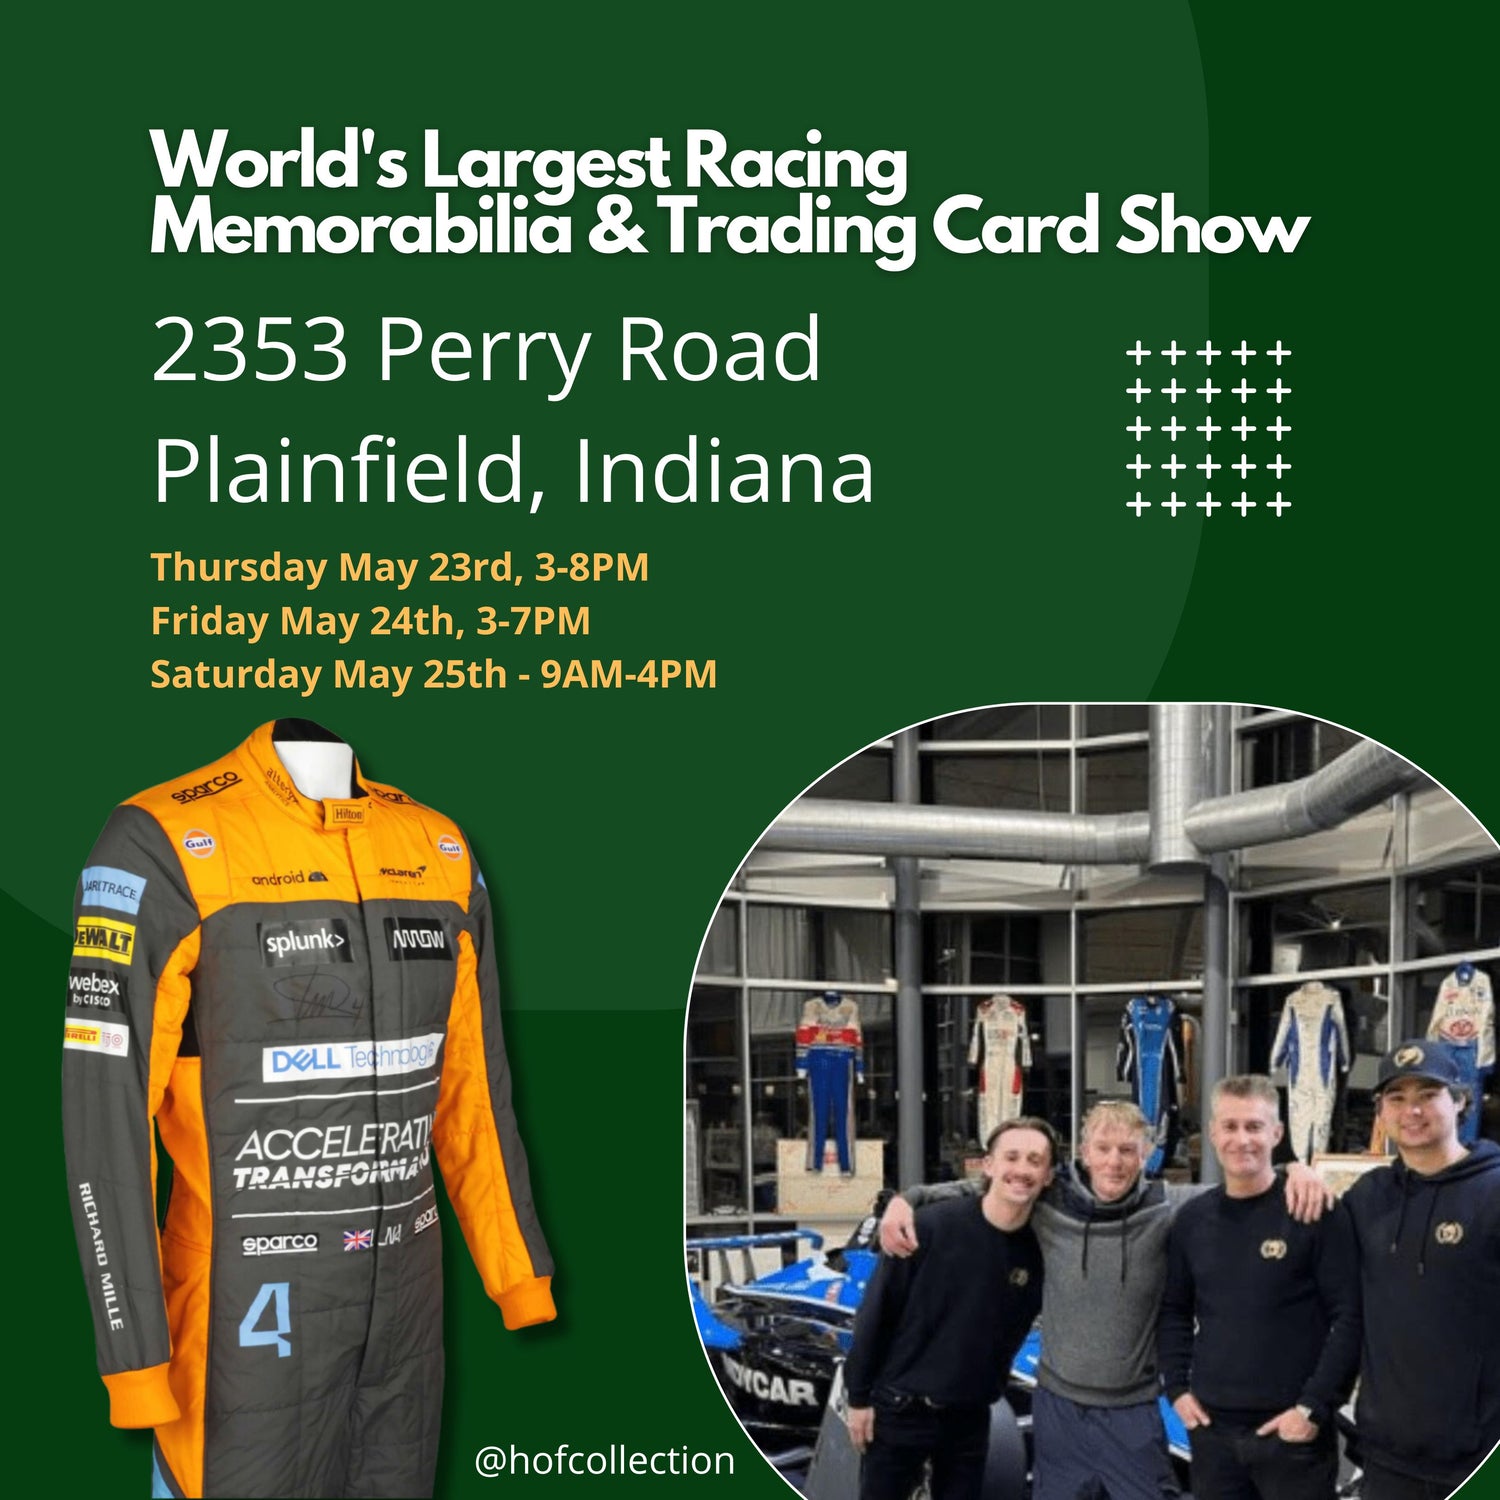 World's Largest Racing Memorabilia Show - THIS WEEKEND